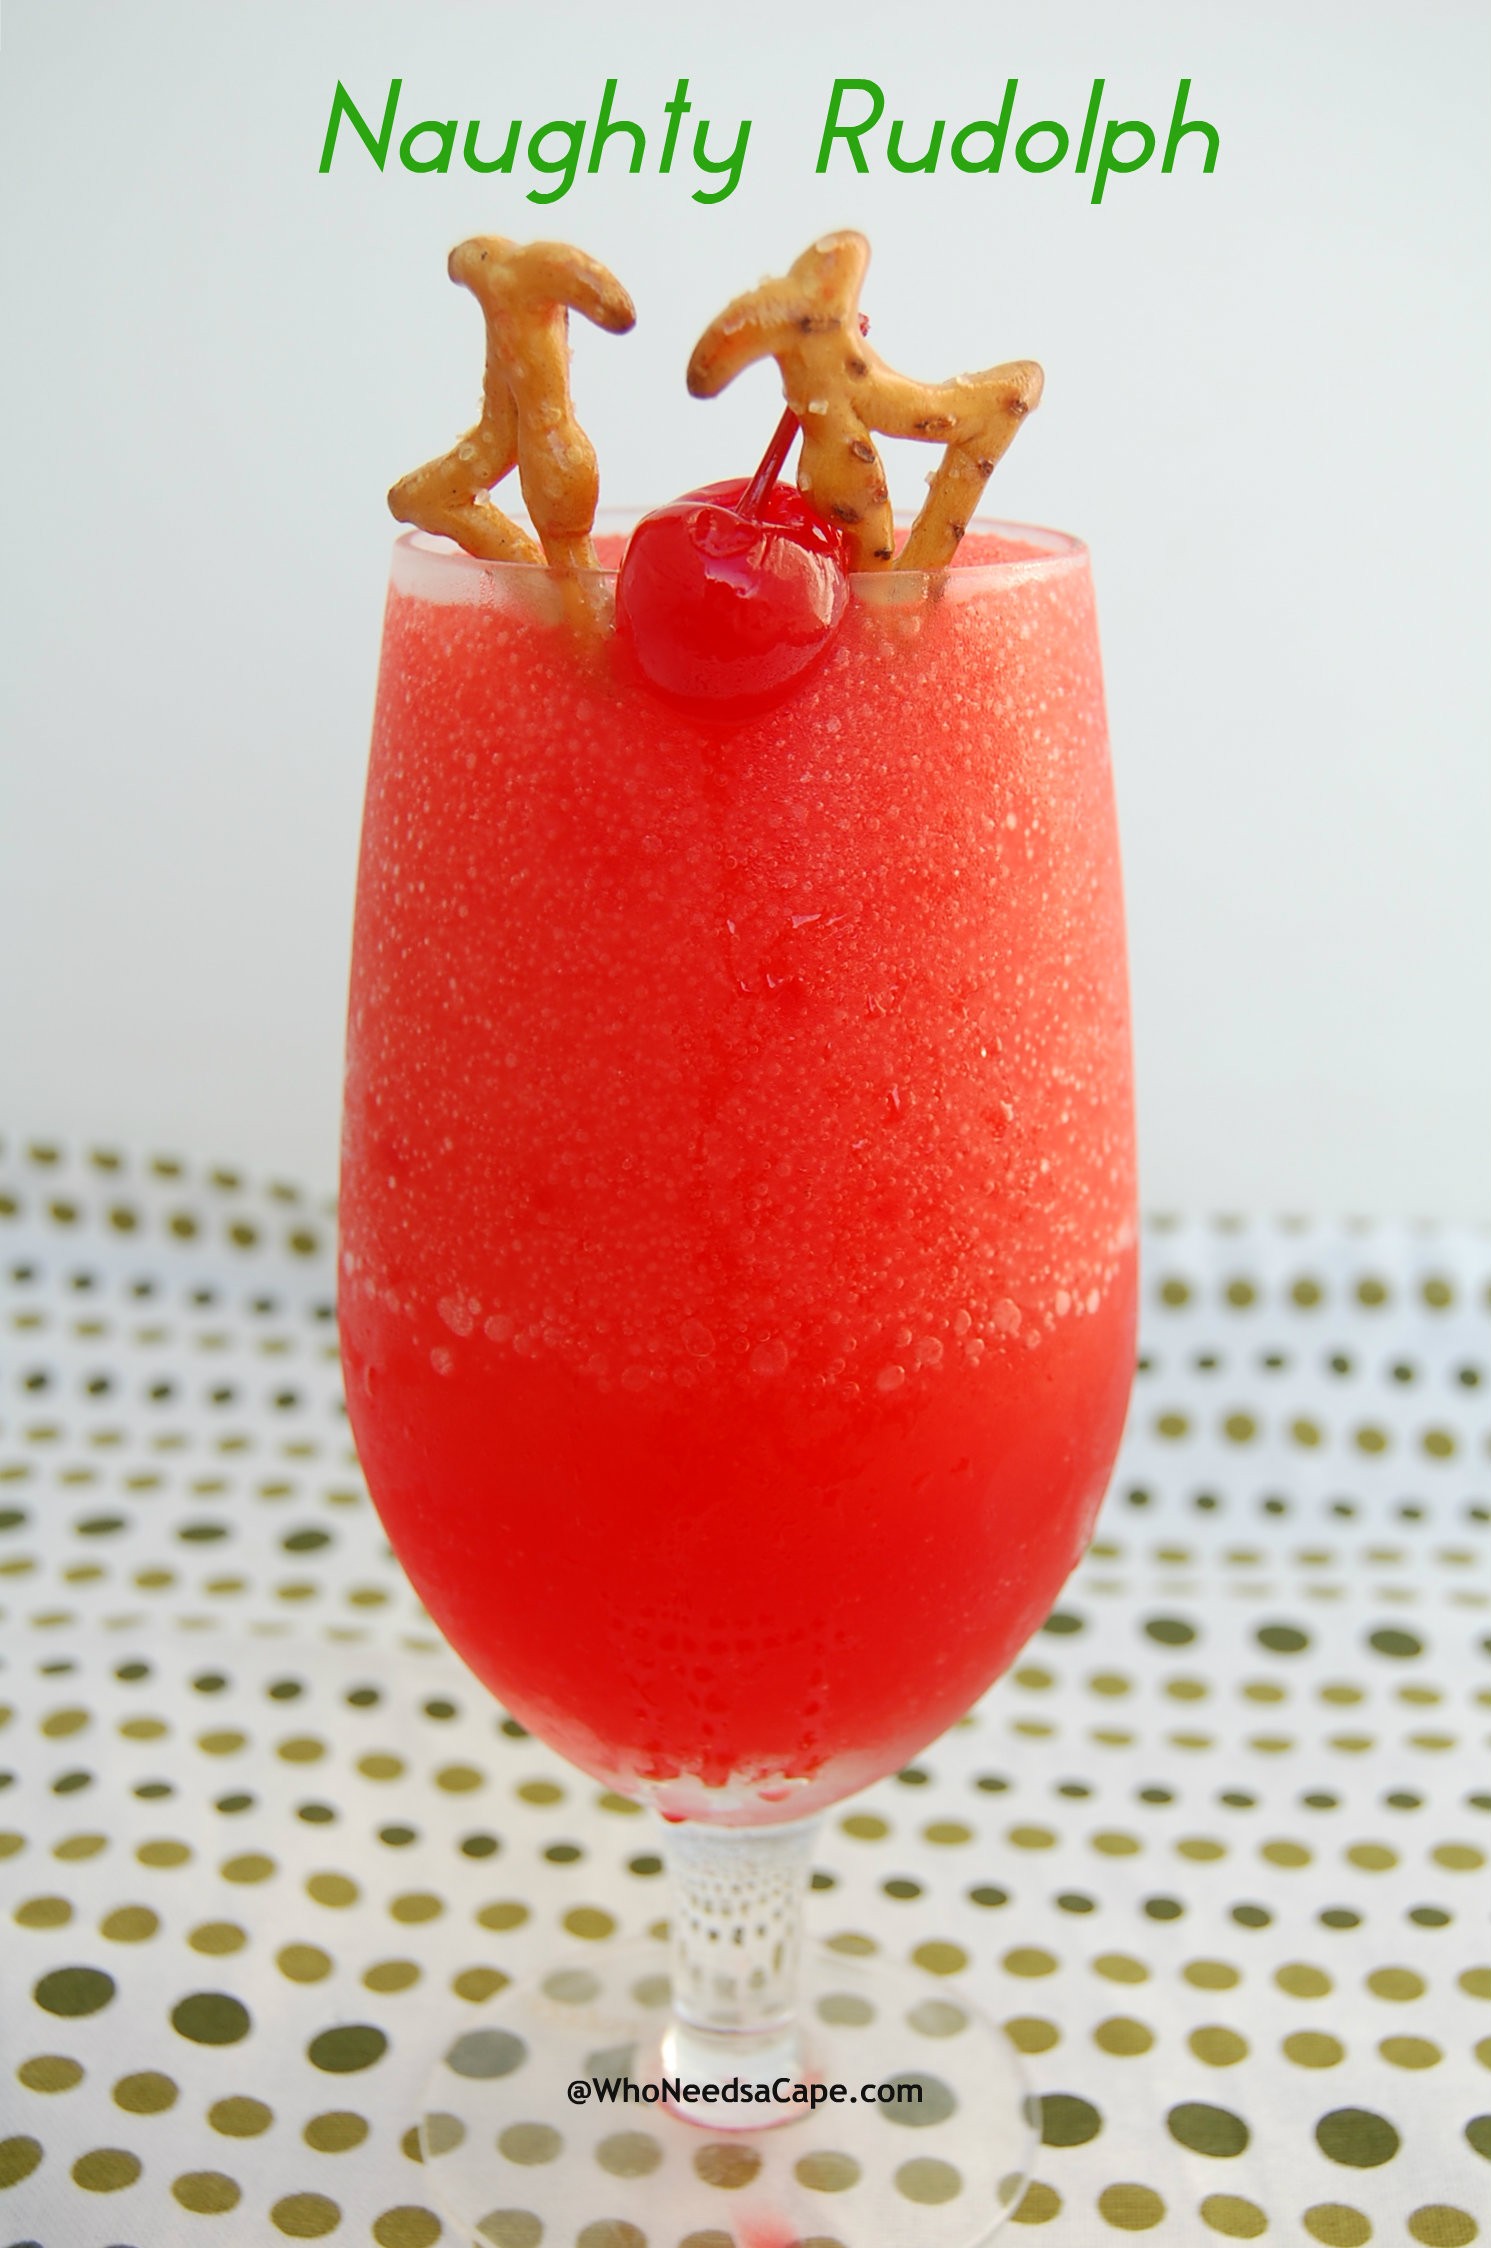 Naughty Rudolph The Ultimate List of Holiday Cocktail & Mocktail Recipes. With over 50 recipes to choose from and constantly adding more, you will never be short of ideas! If you are hosting a Holiday Party or are enjoying a night in with a Hallmark movie, you are sure to find the right drink for the occasion in this post. Cheers!